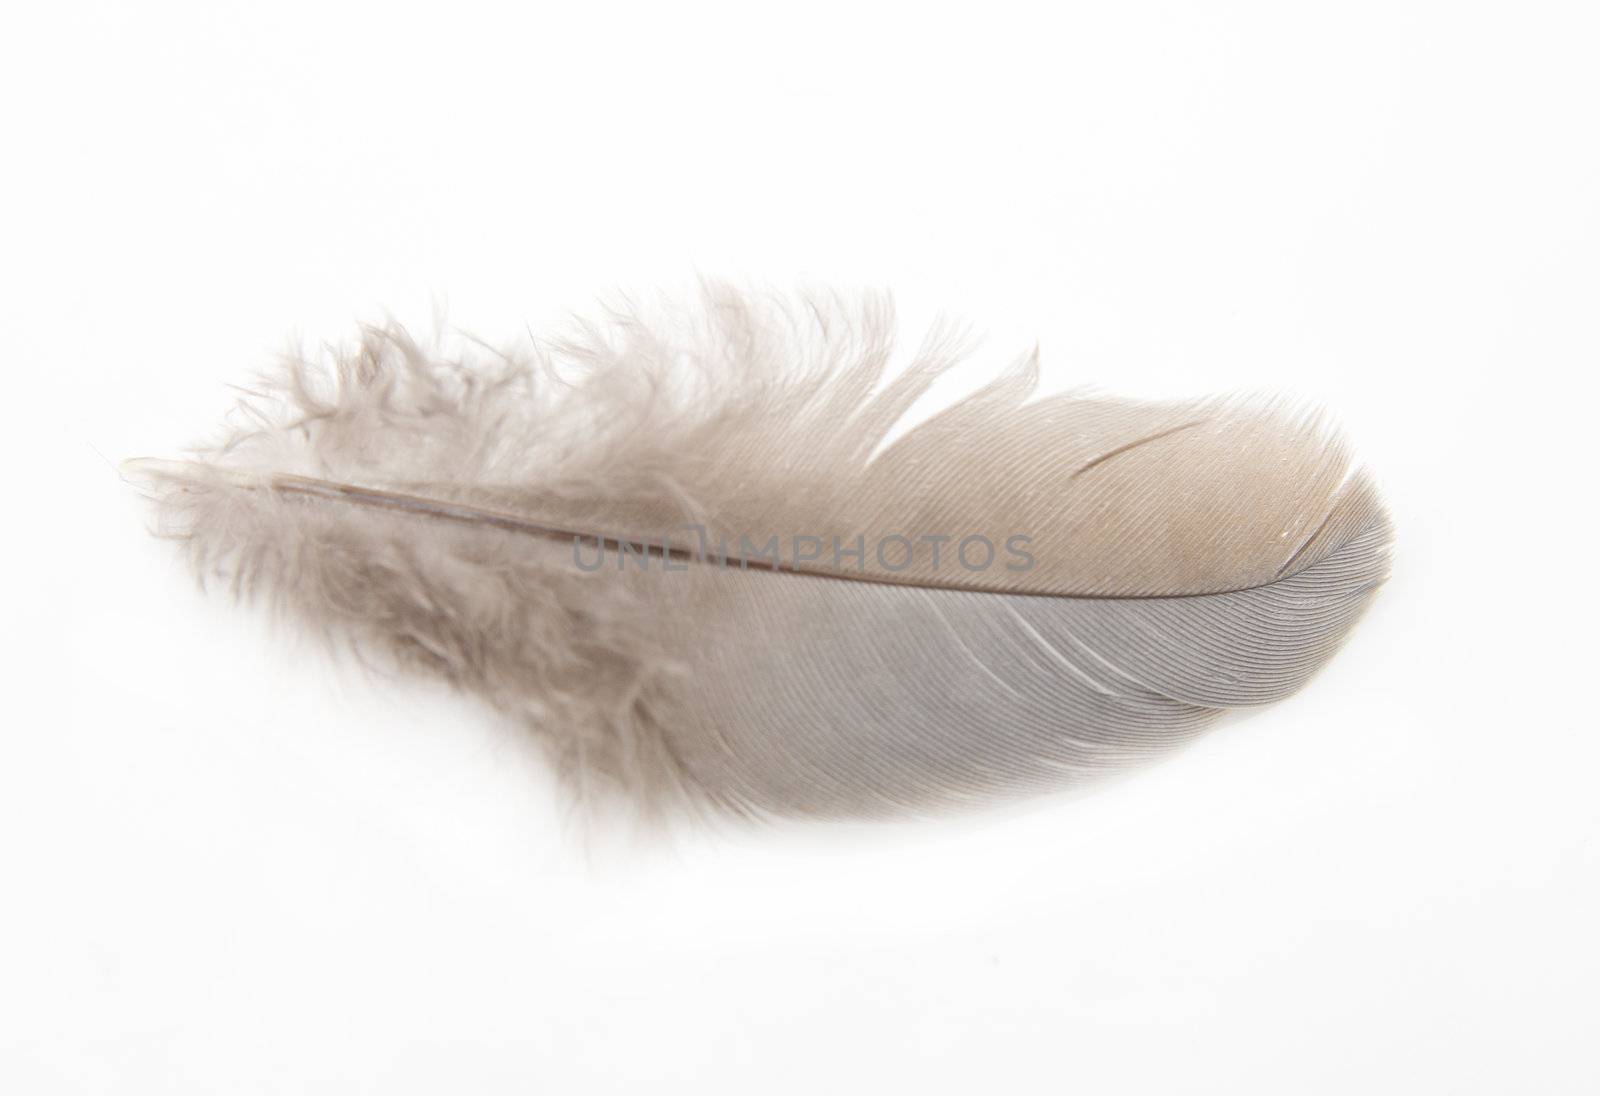 Feather of a pigeon on a white background by schankz